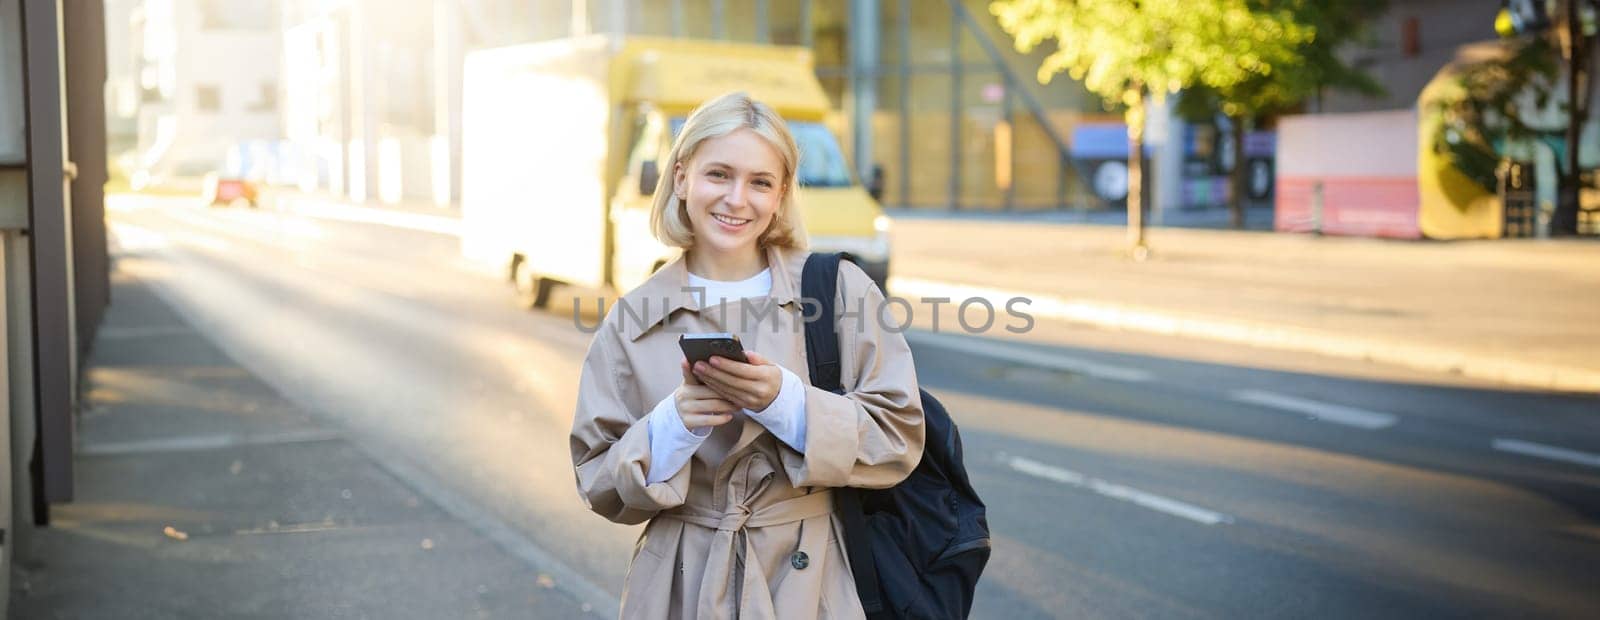 Street style portrait of blonde smiling woman walks on street, sunny bright day, holding smartphone, carries backpack, orders taxi on mobile application, sends message on cell phone.